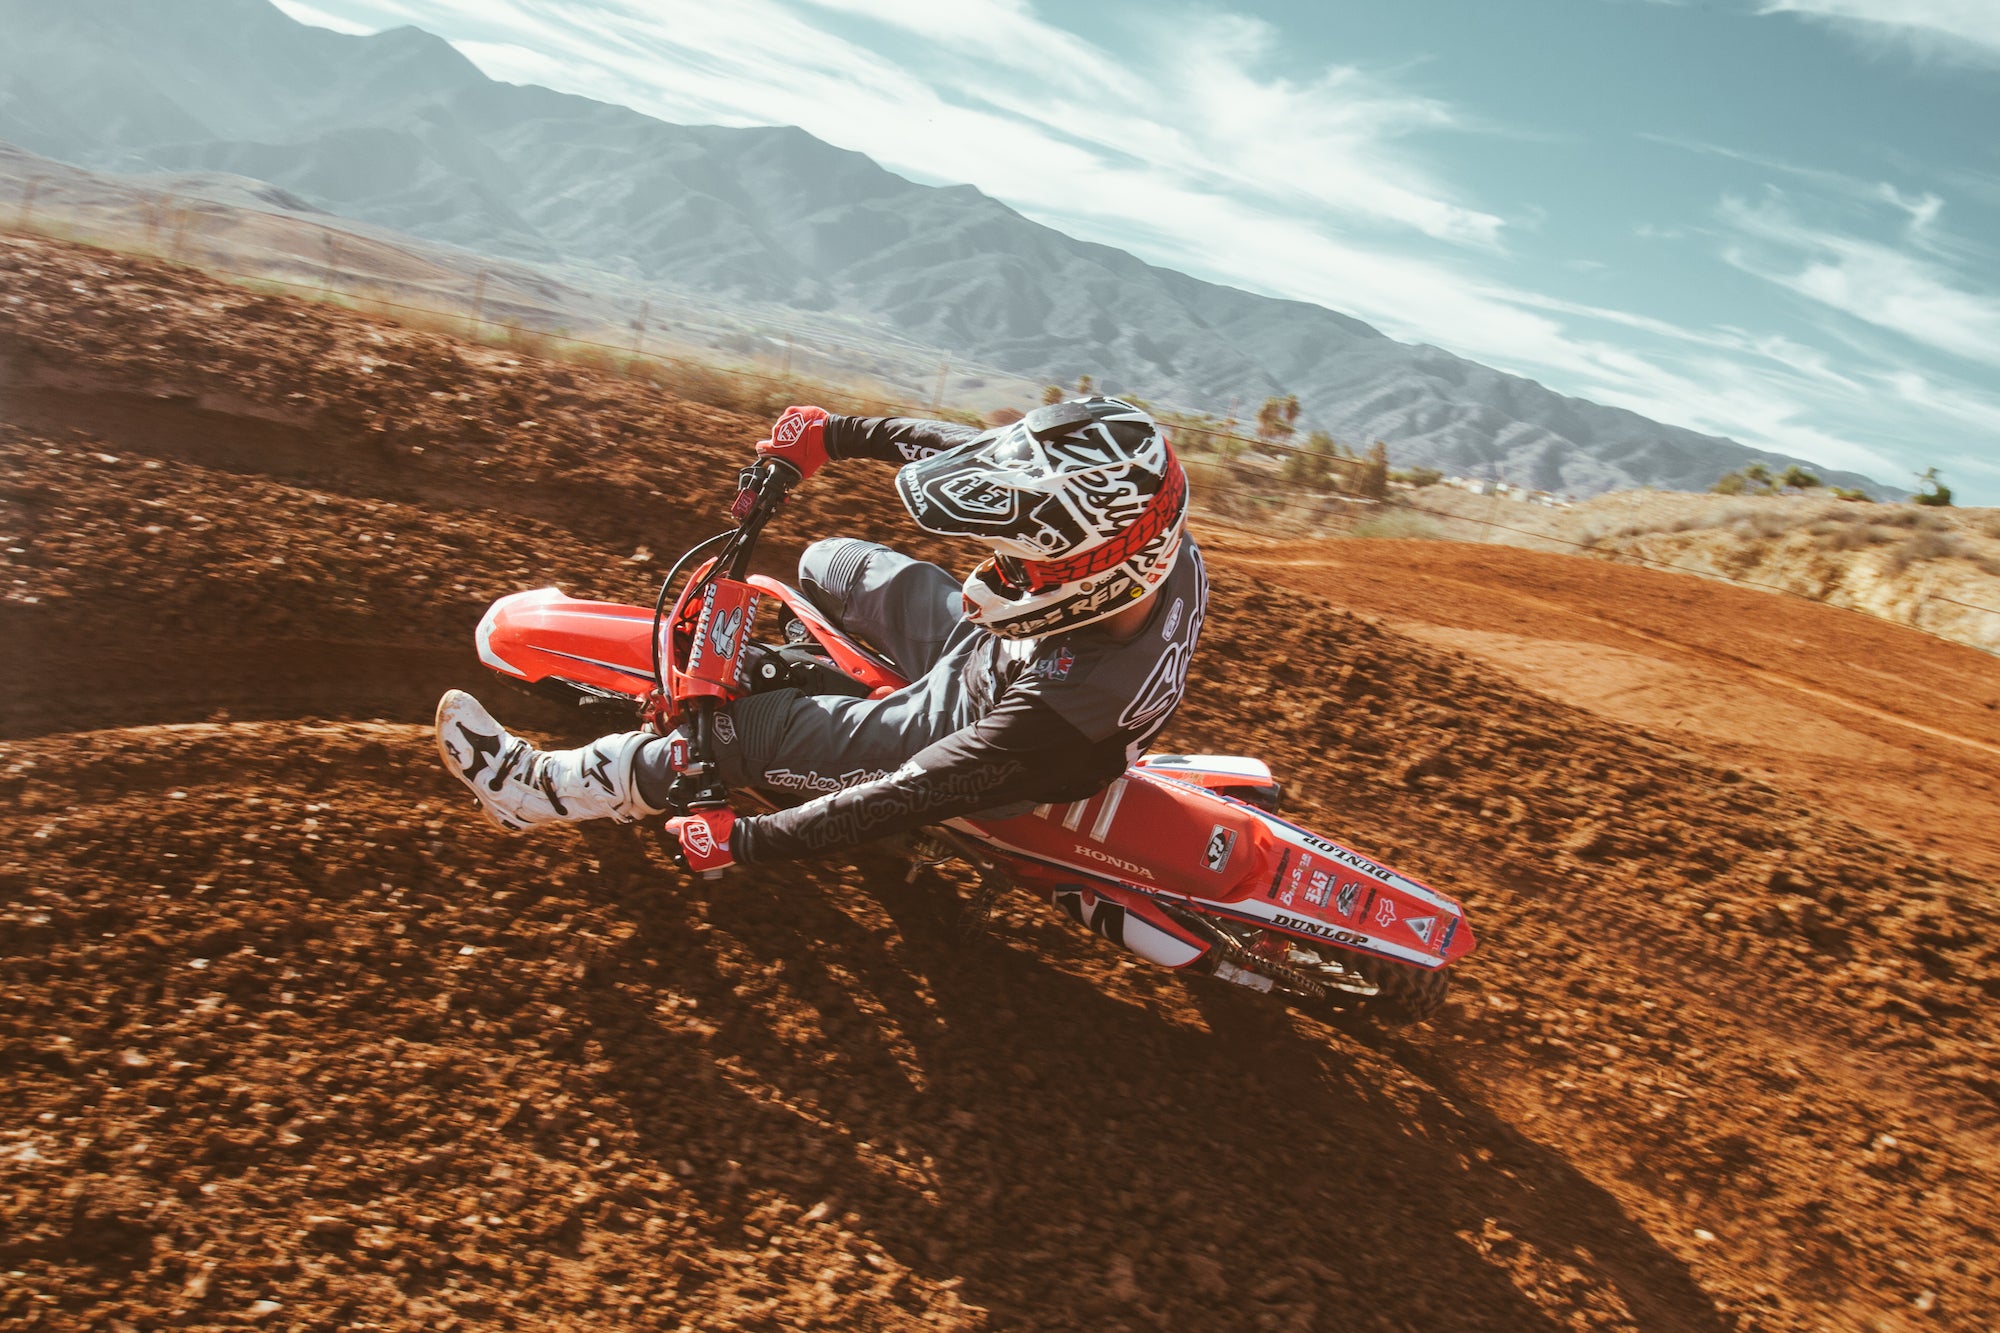 Welcome to the Team, Cole Seely